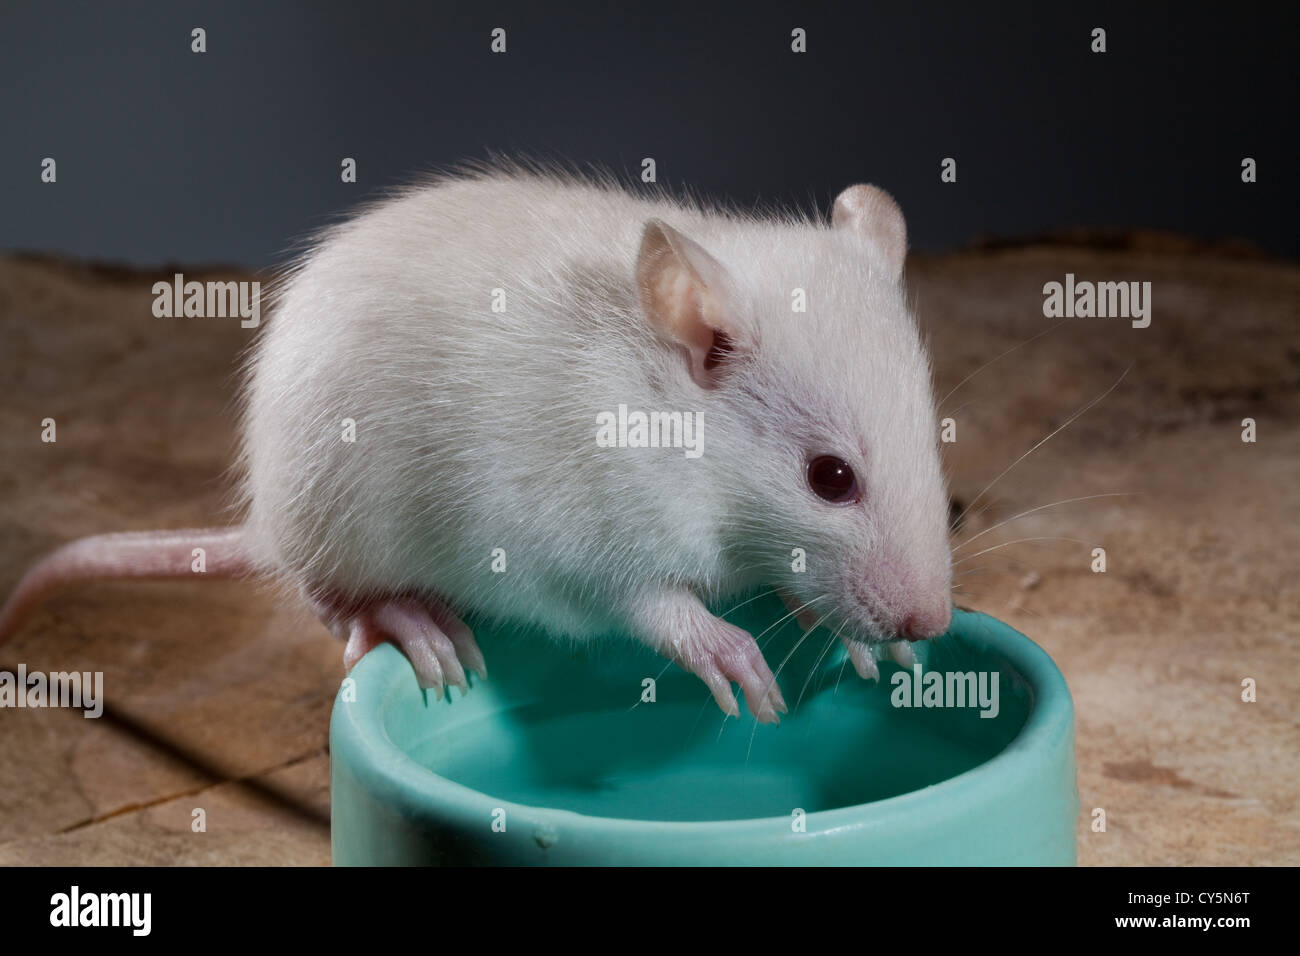 Young White or Albino Rat (Rattus norvegicus). Pet, balancing on the edge of a water bowl. Stock Photo